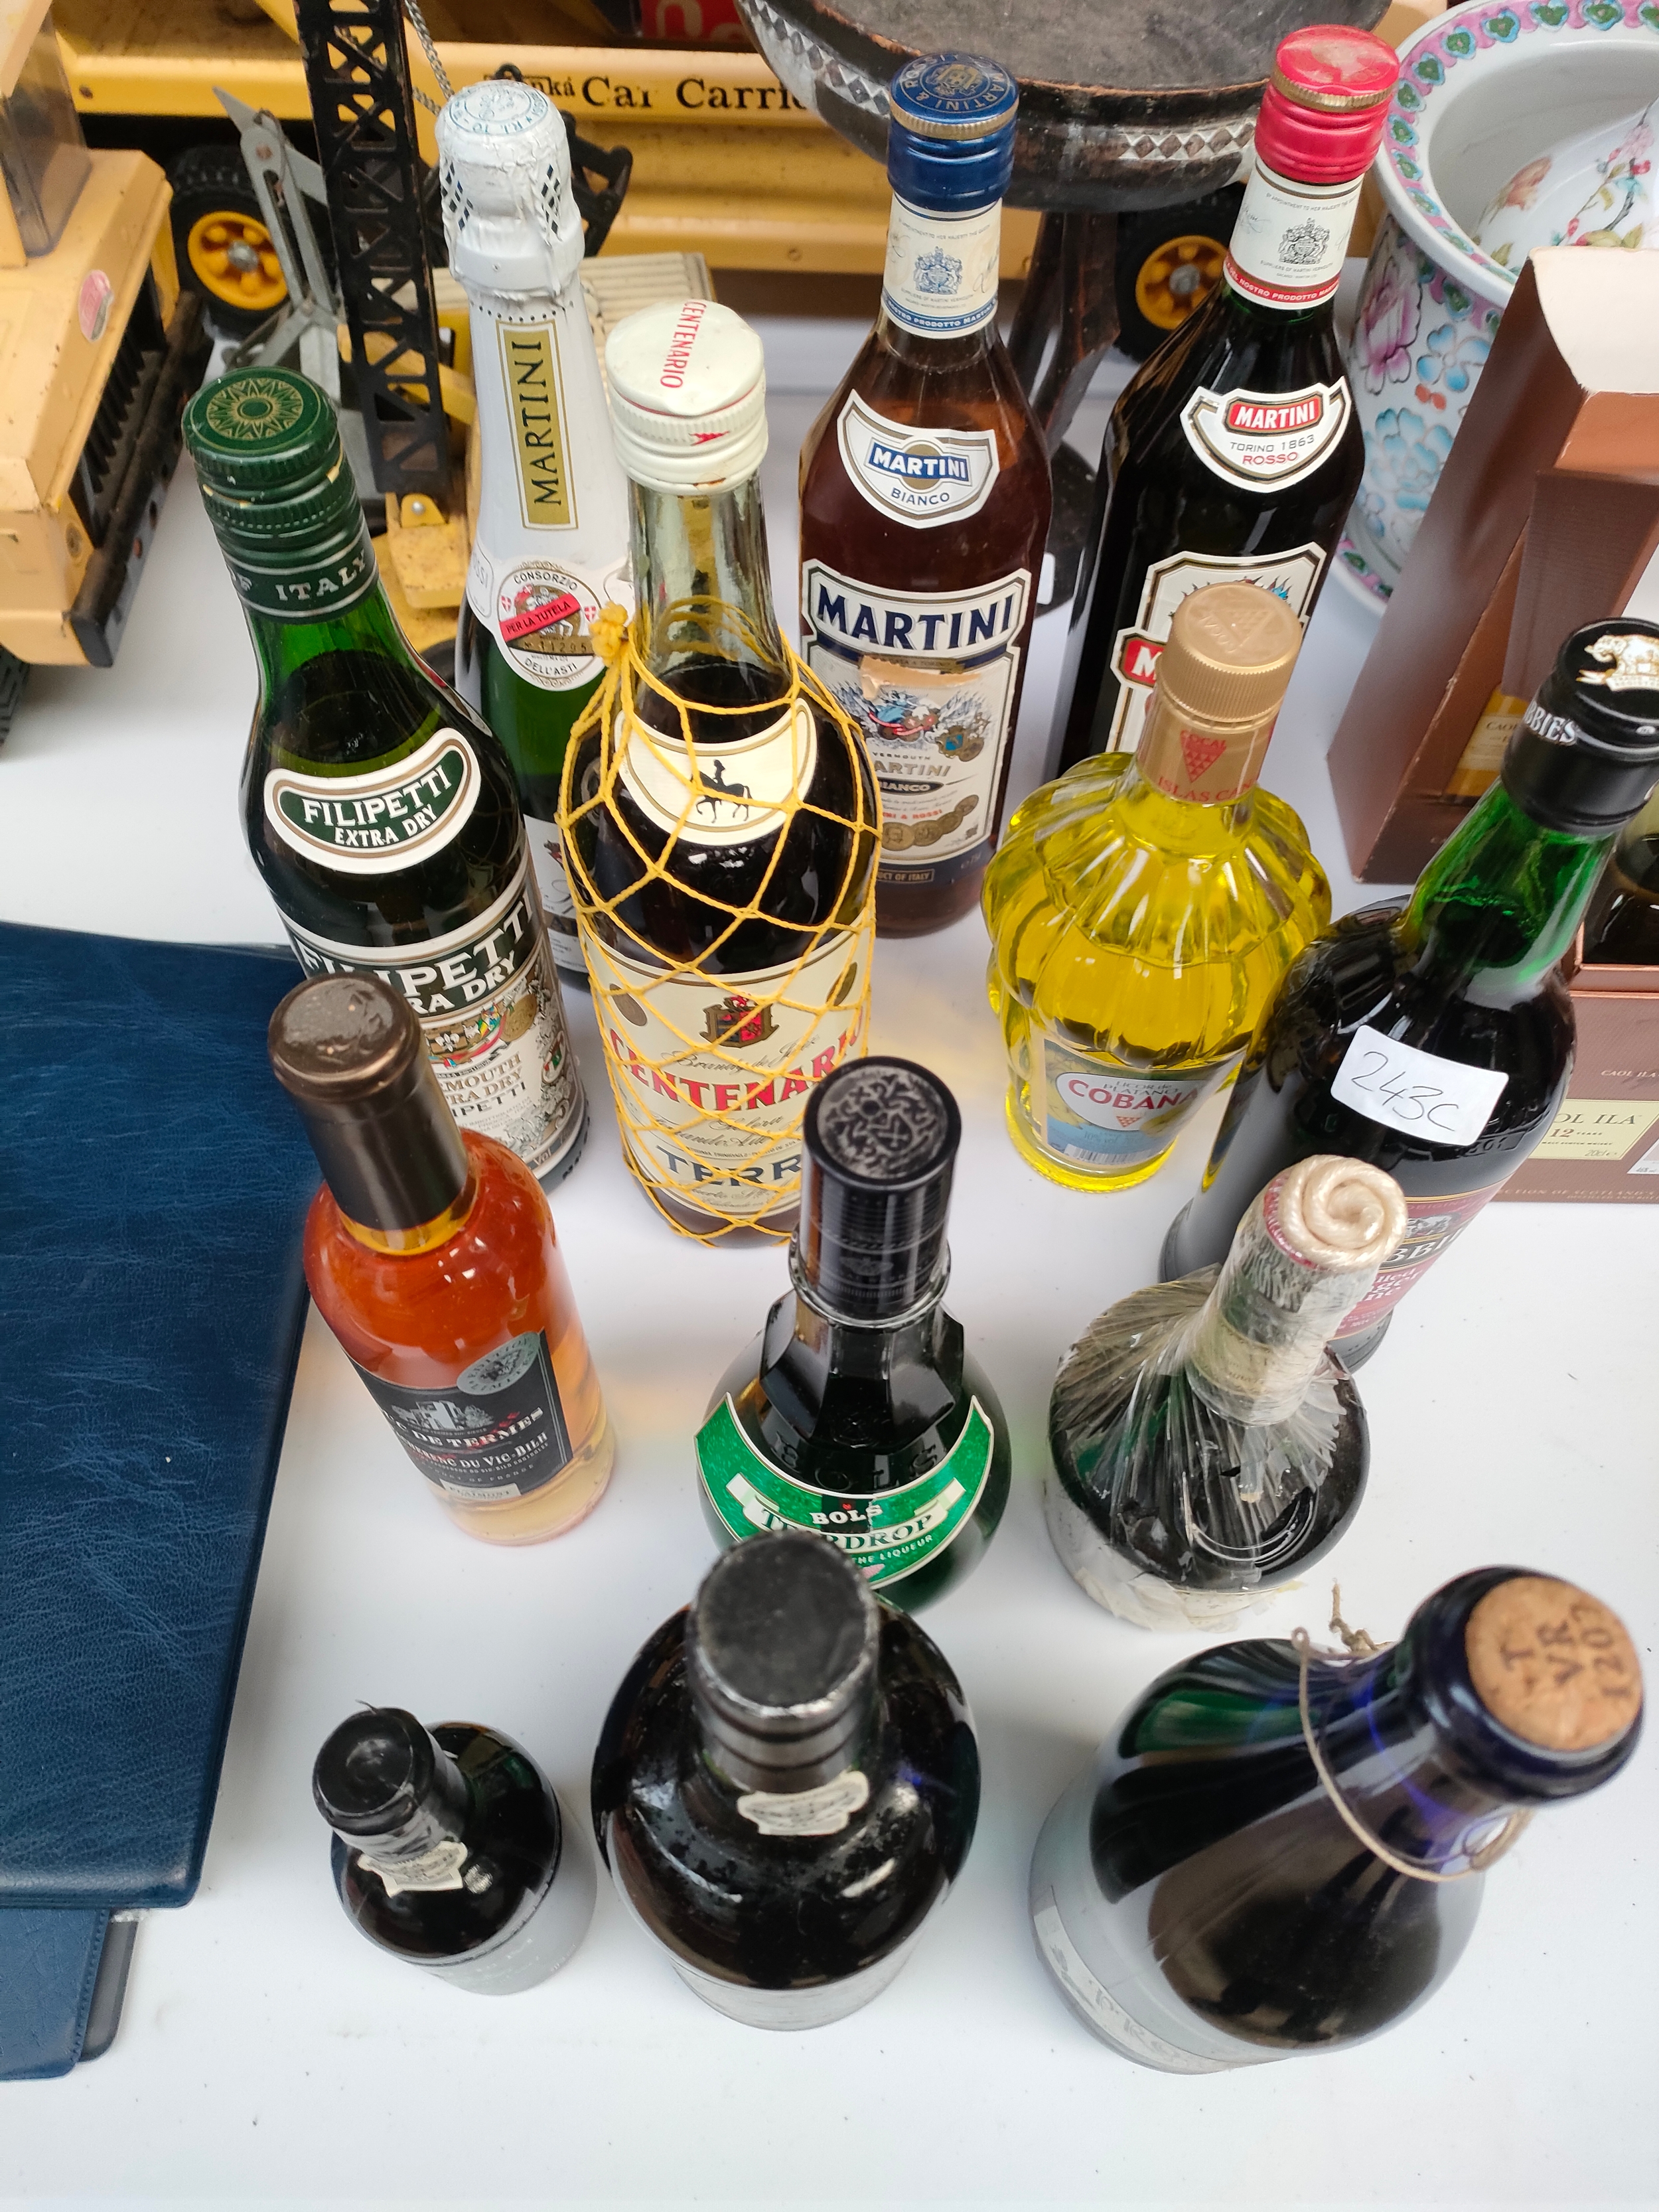 Selection of alcoholic beverages includes Martini etc